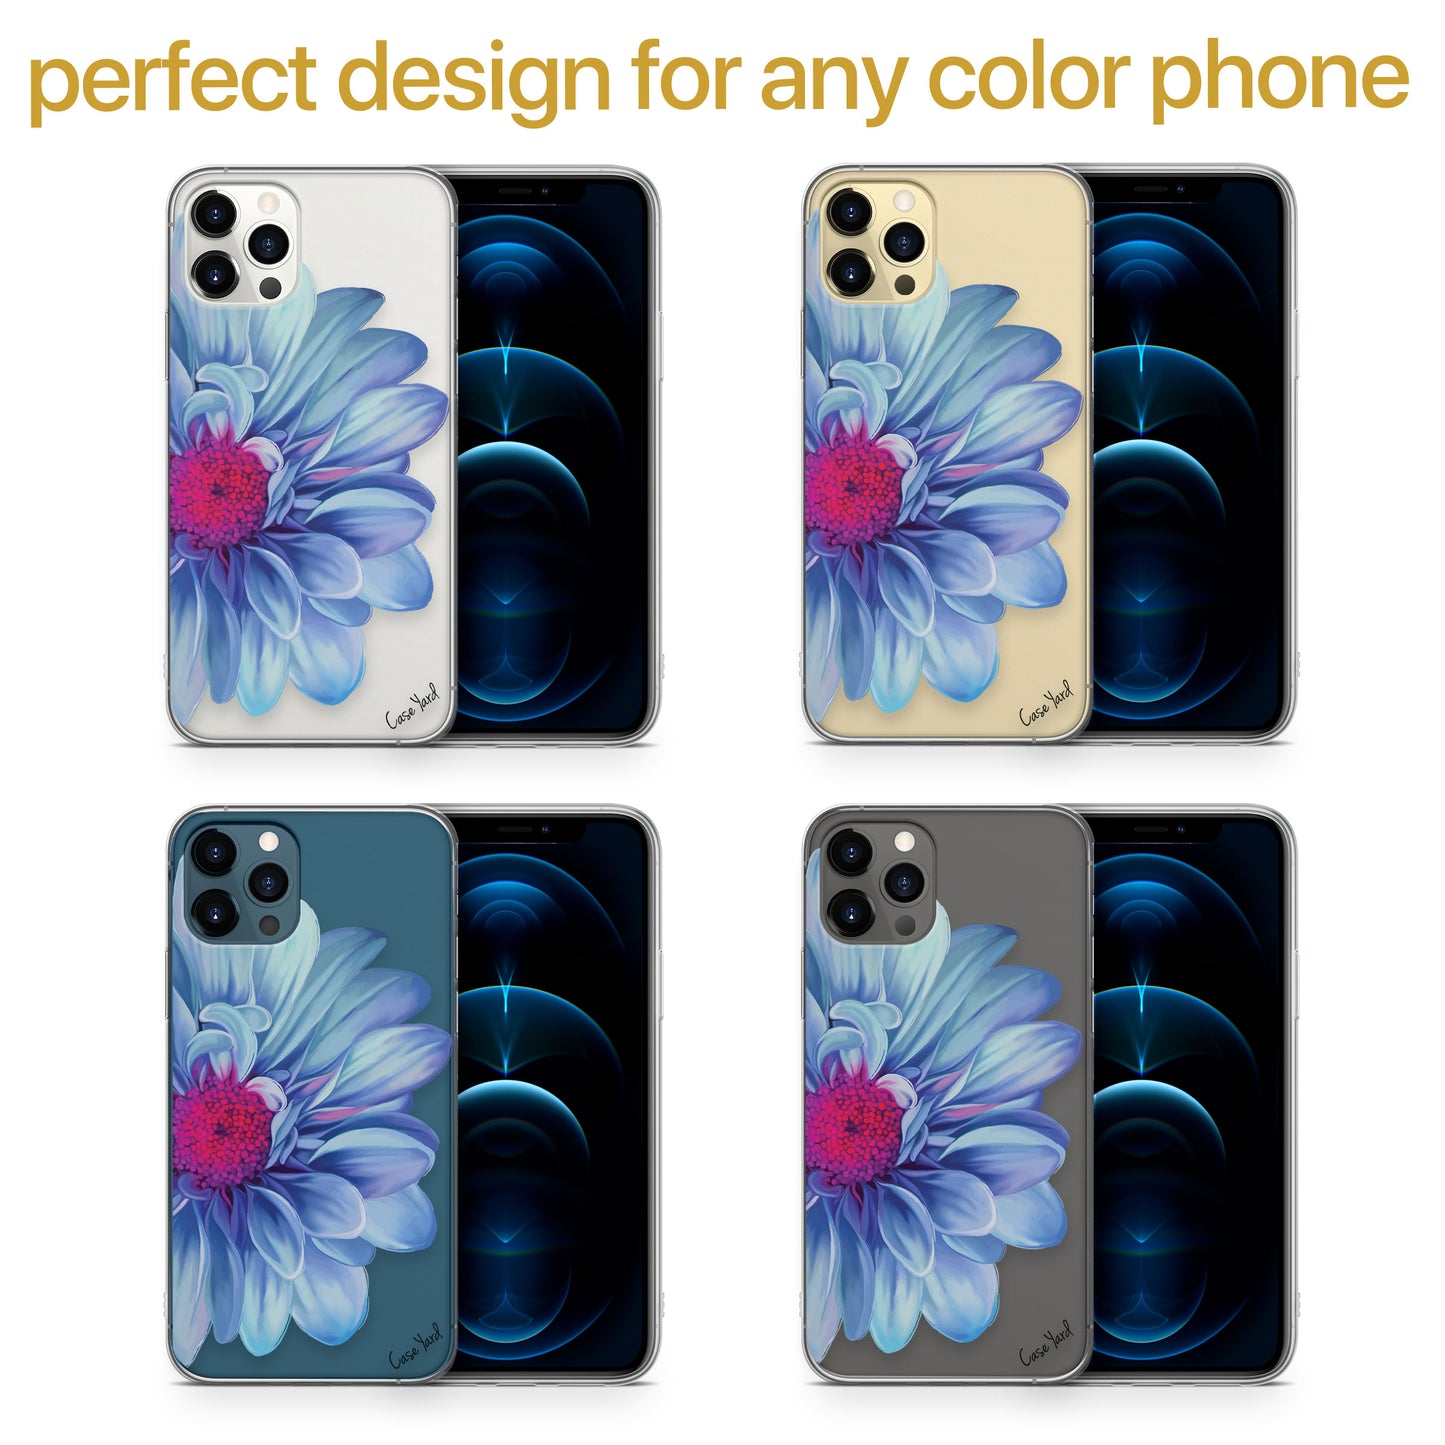 TPU Clear case with (Mona Lisa Flower) Design for iPhone & Samsung Phones